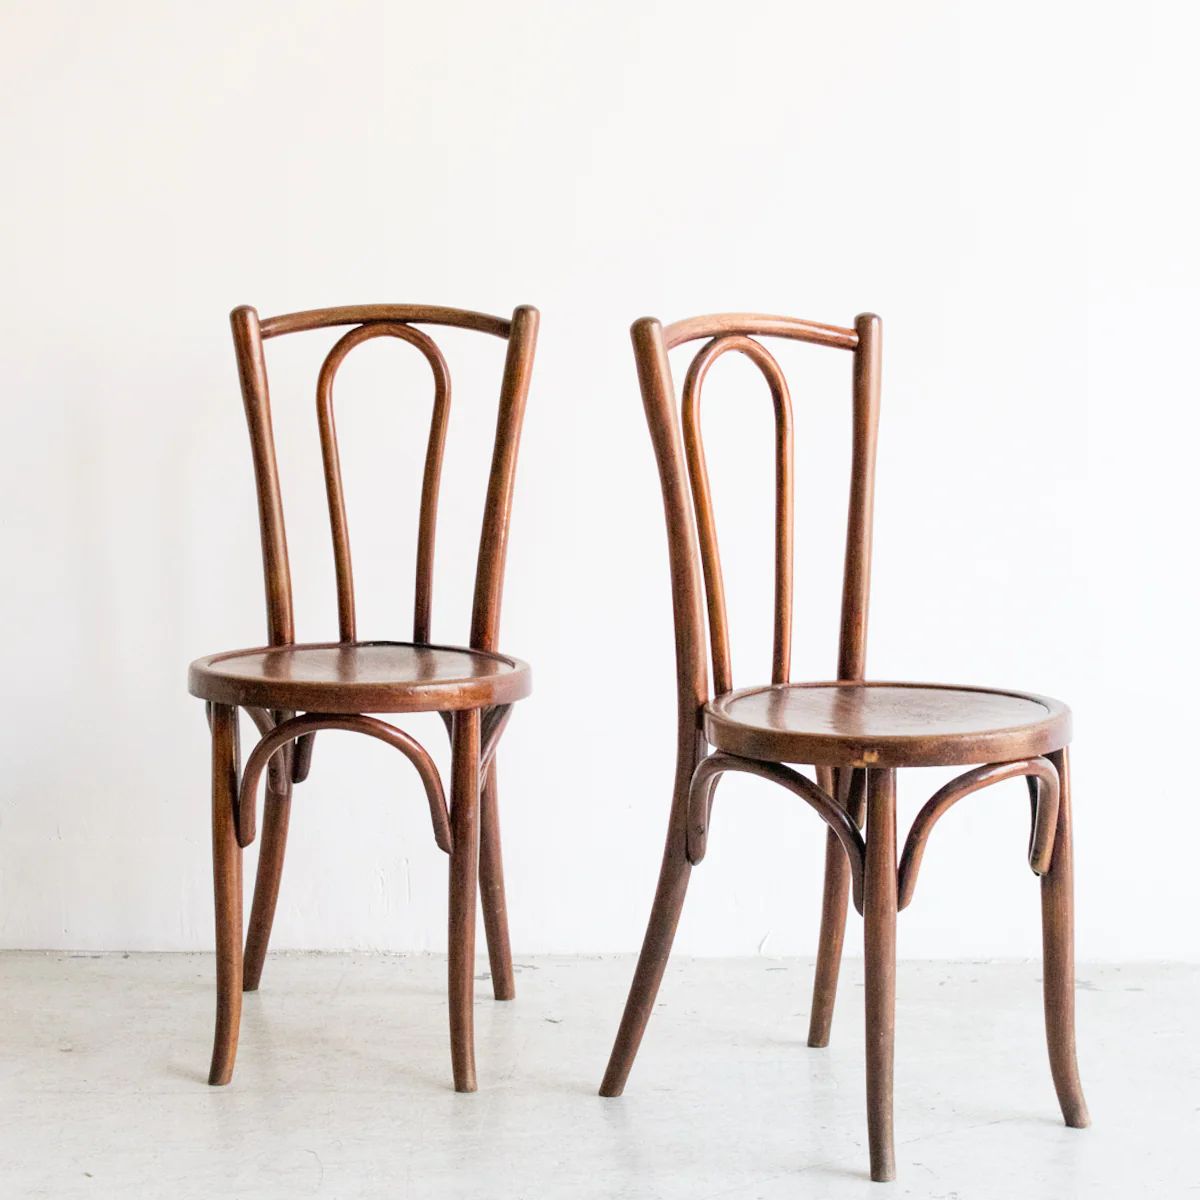 Pair of Art Nouveau Dining Chairs | Elsie Green US